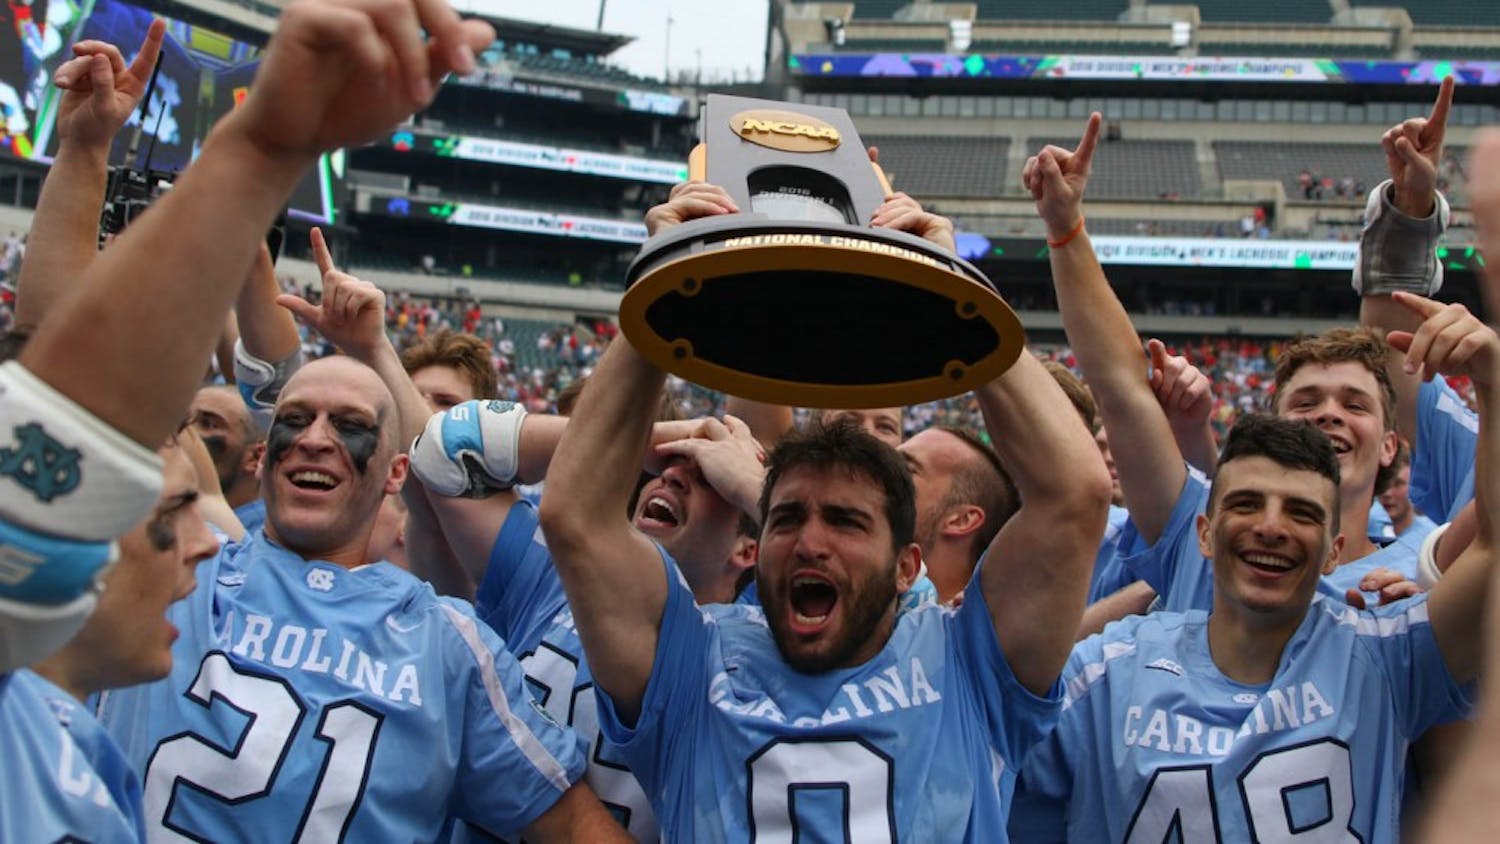 UNC attacker Steve Pontrello (0) hoists up the NCAA national championship trophy while his teammates celebrate around him.&nbsp;The unseeded North Carolina men's lacrosse team defeated No. 1 Maryland 14-13 in overtime to claim the program's first national championship since 1991 on Monday at Lincoln Financial Field in Philadelphia.